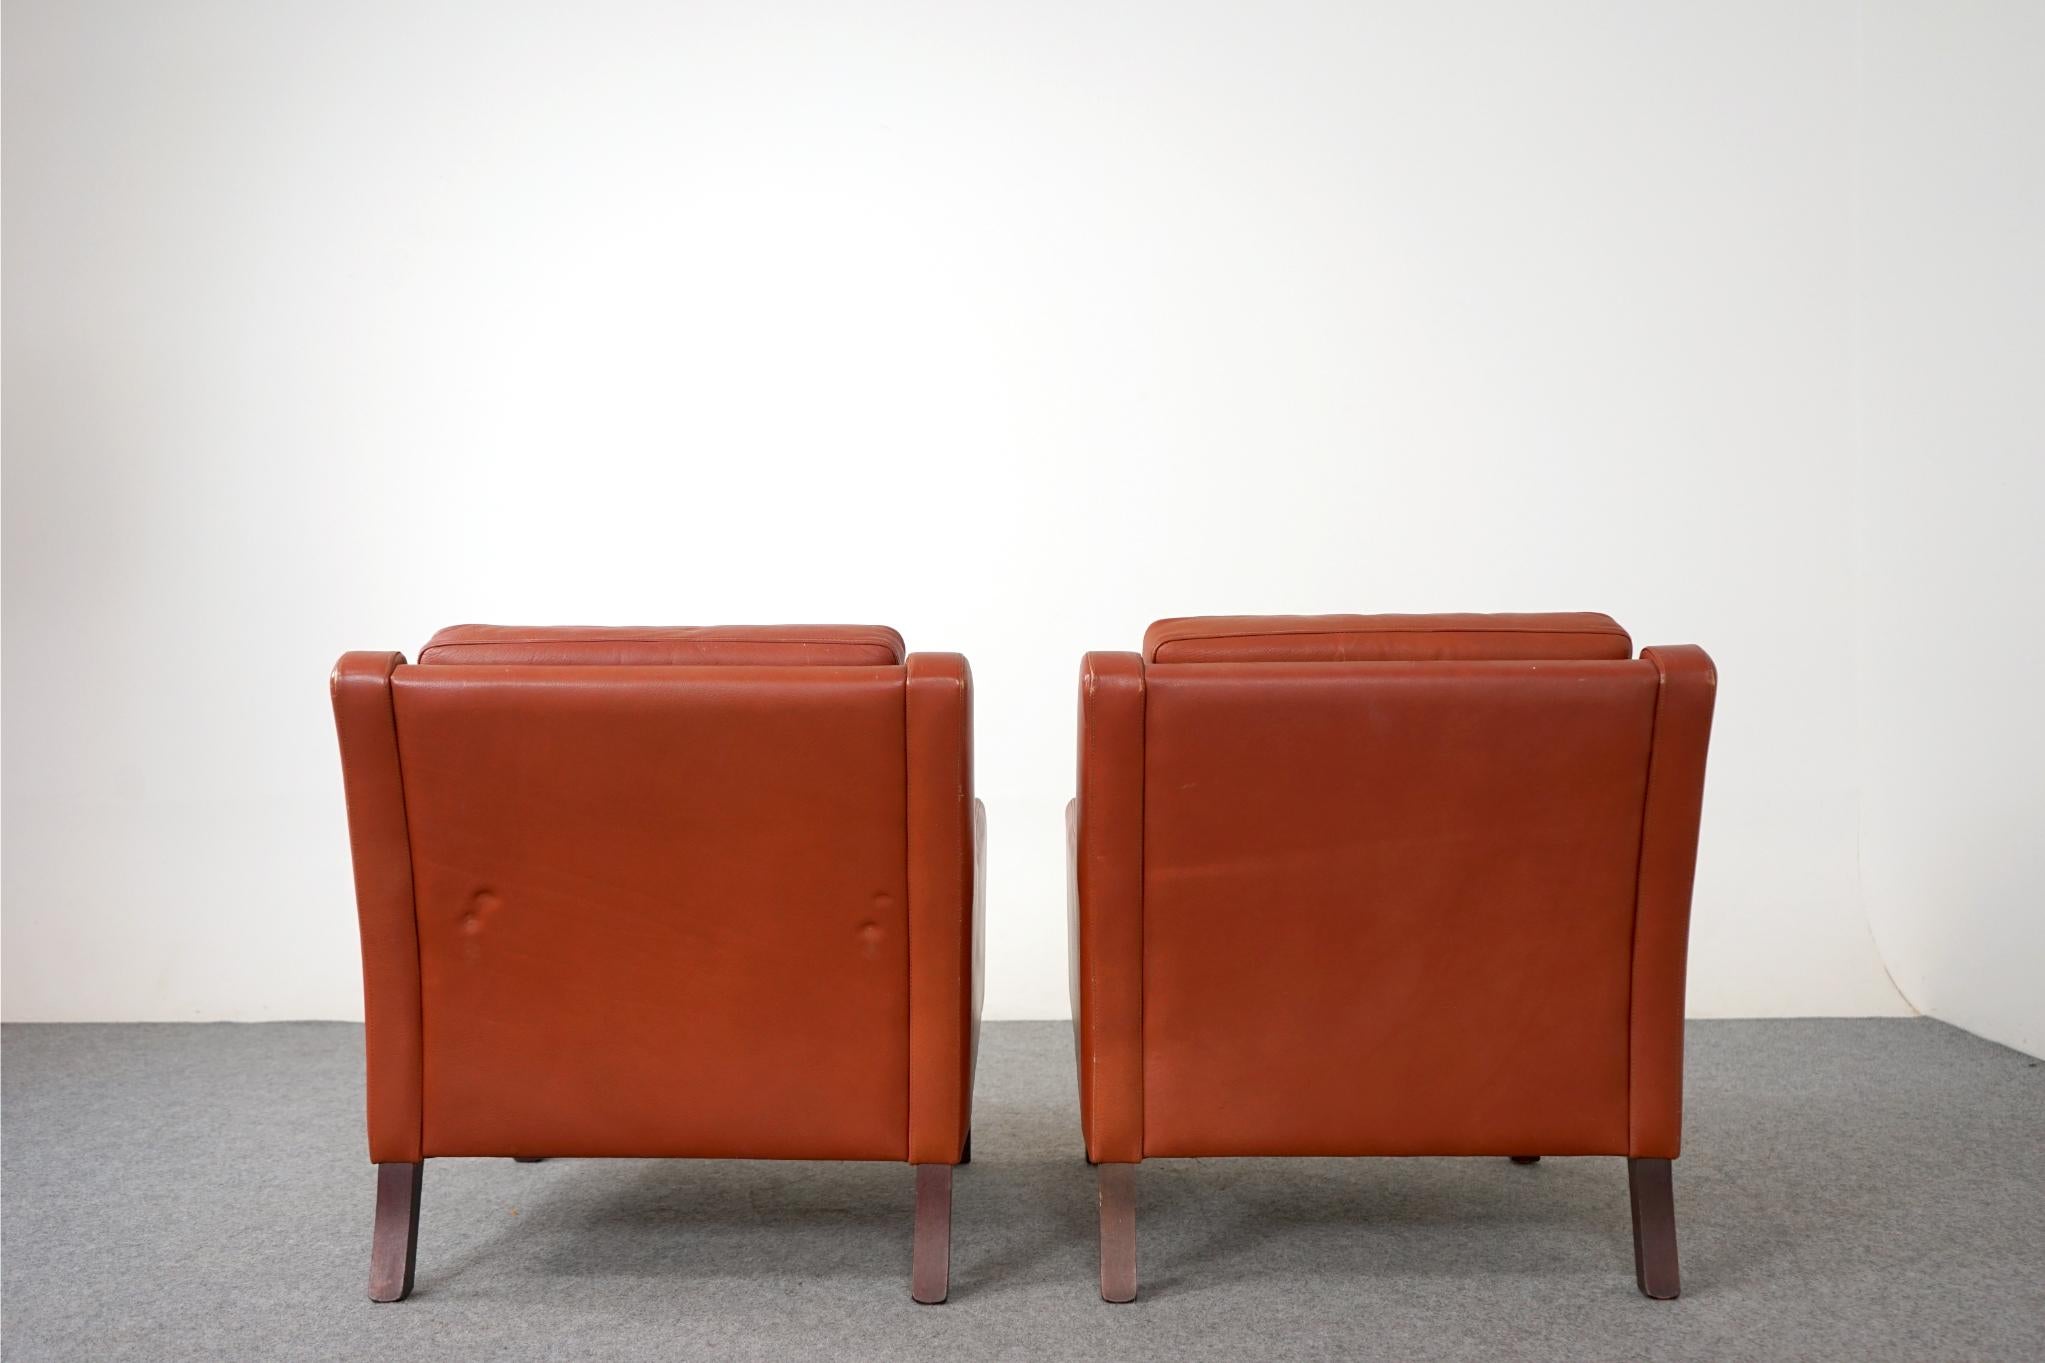 Pair of Danish Mid-Century Modern Tufted Leather Loungers For Sale 5